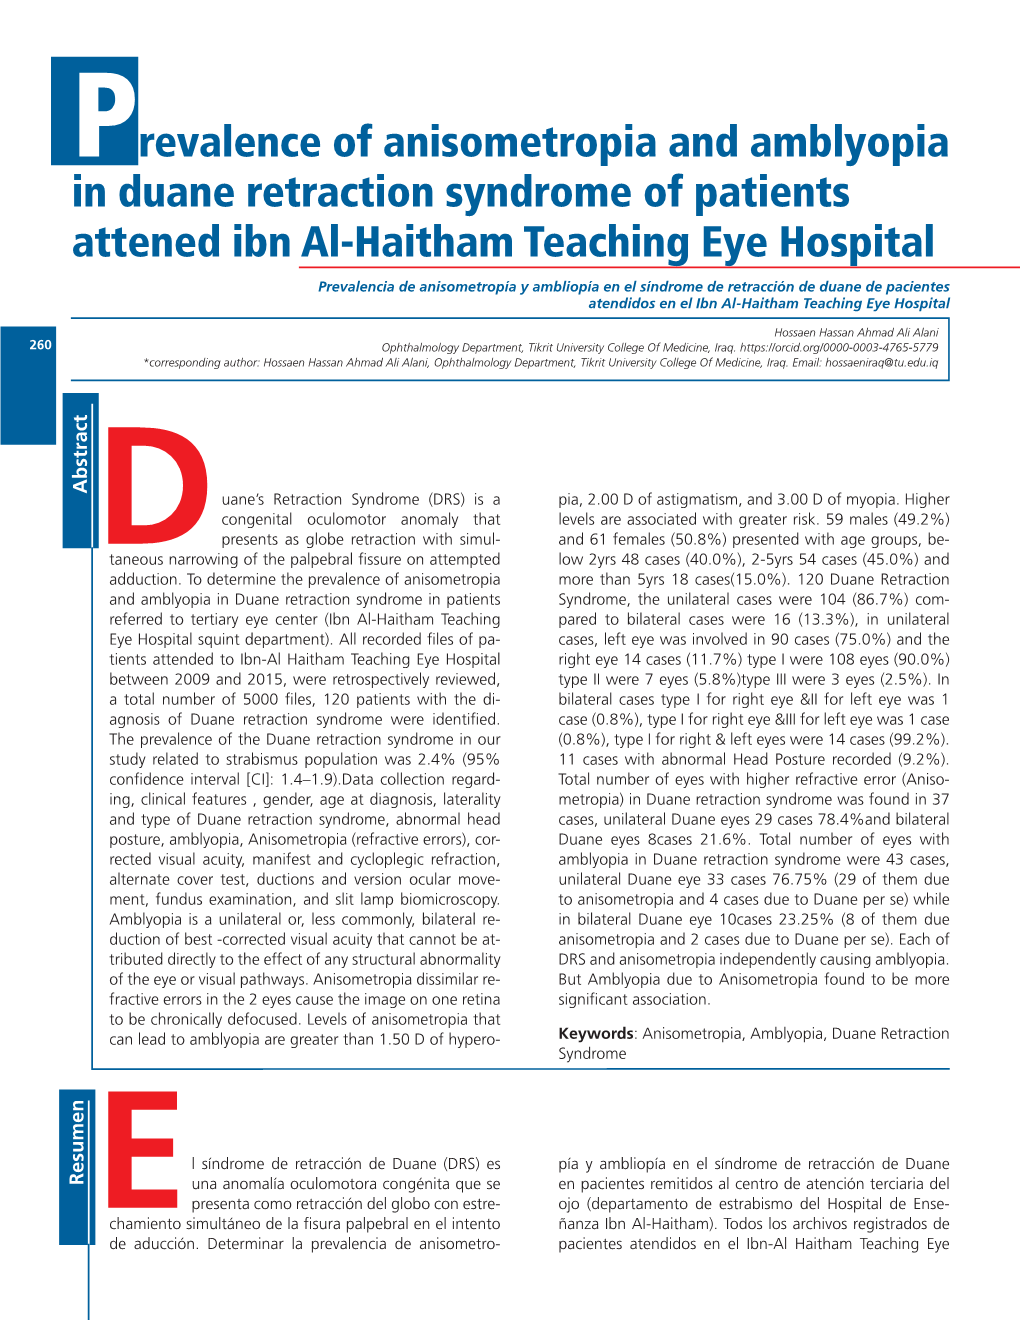 Prevalence of Anisometropia and Amblyopia in Duane Retraction